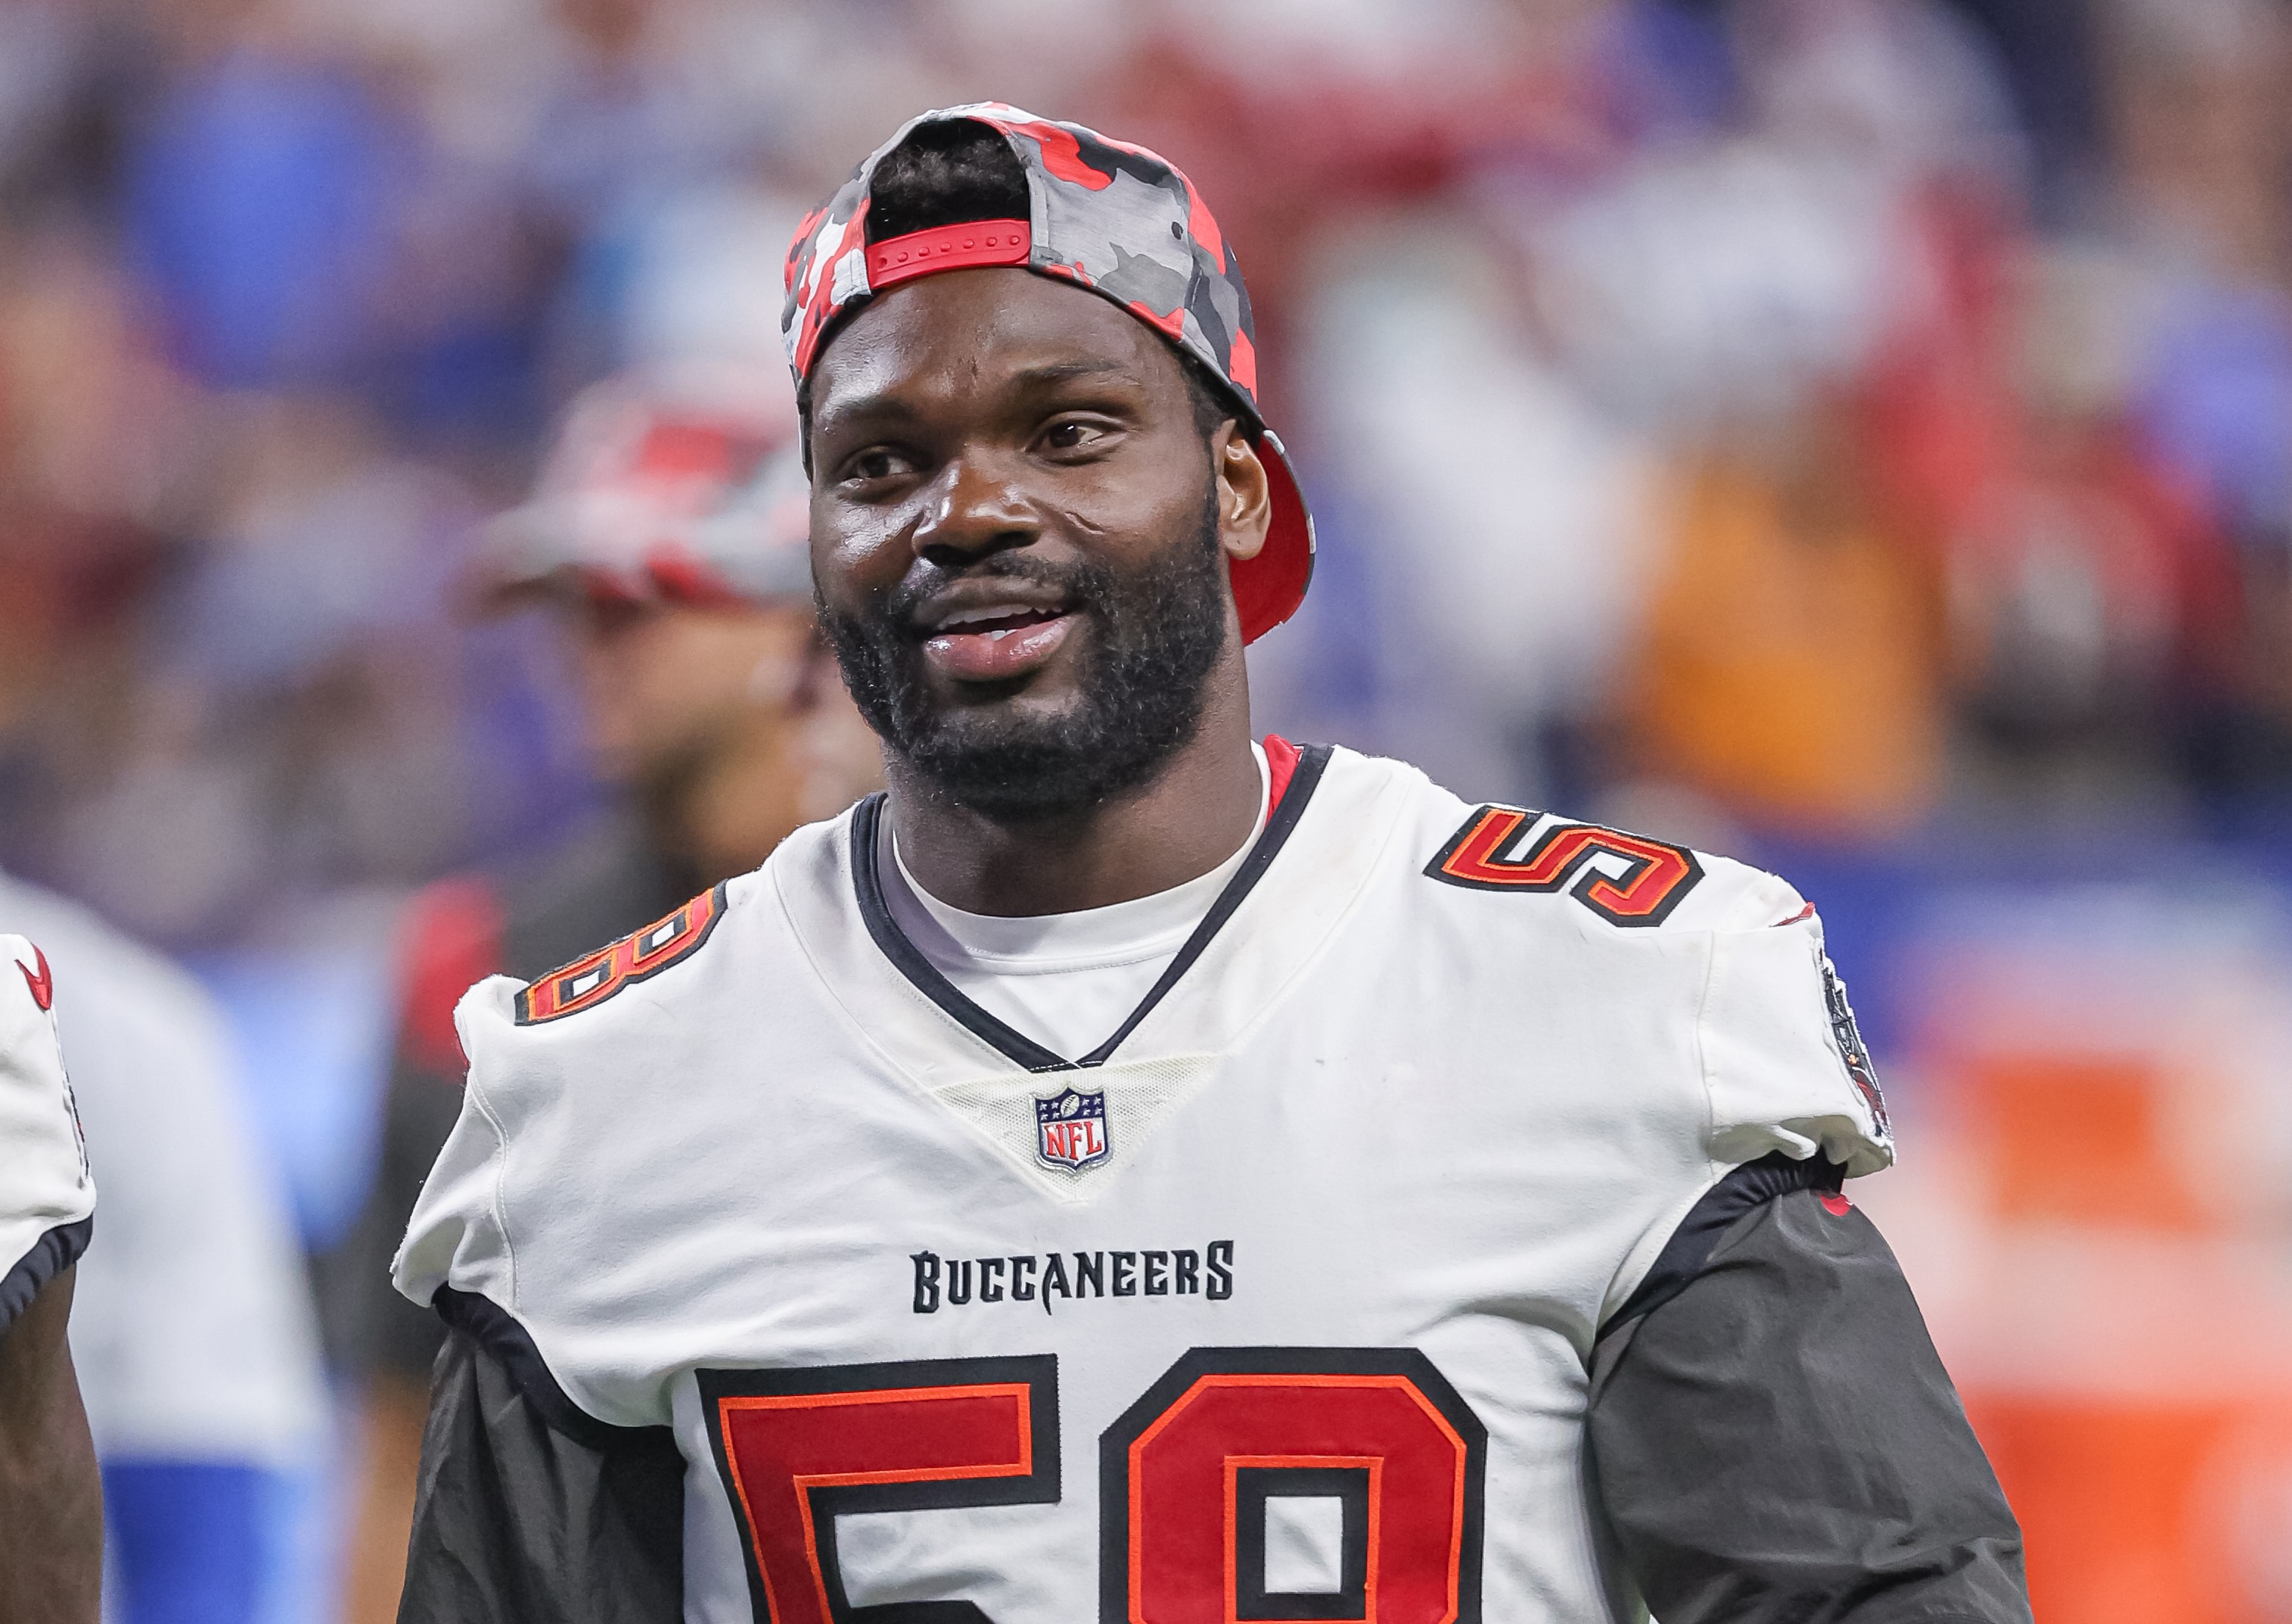 Shaquil Barrett of Tampa Bay Buccaneers at the preseason game against the Indianapolis Colts in 2022, in Indianapolis, Indiana. | Source: Getty Images|